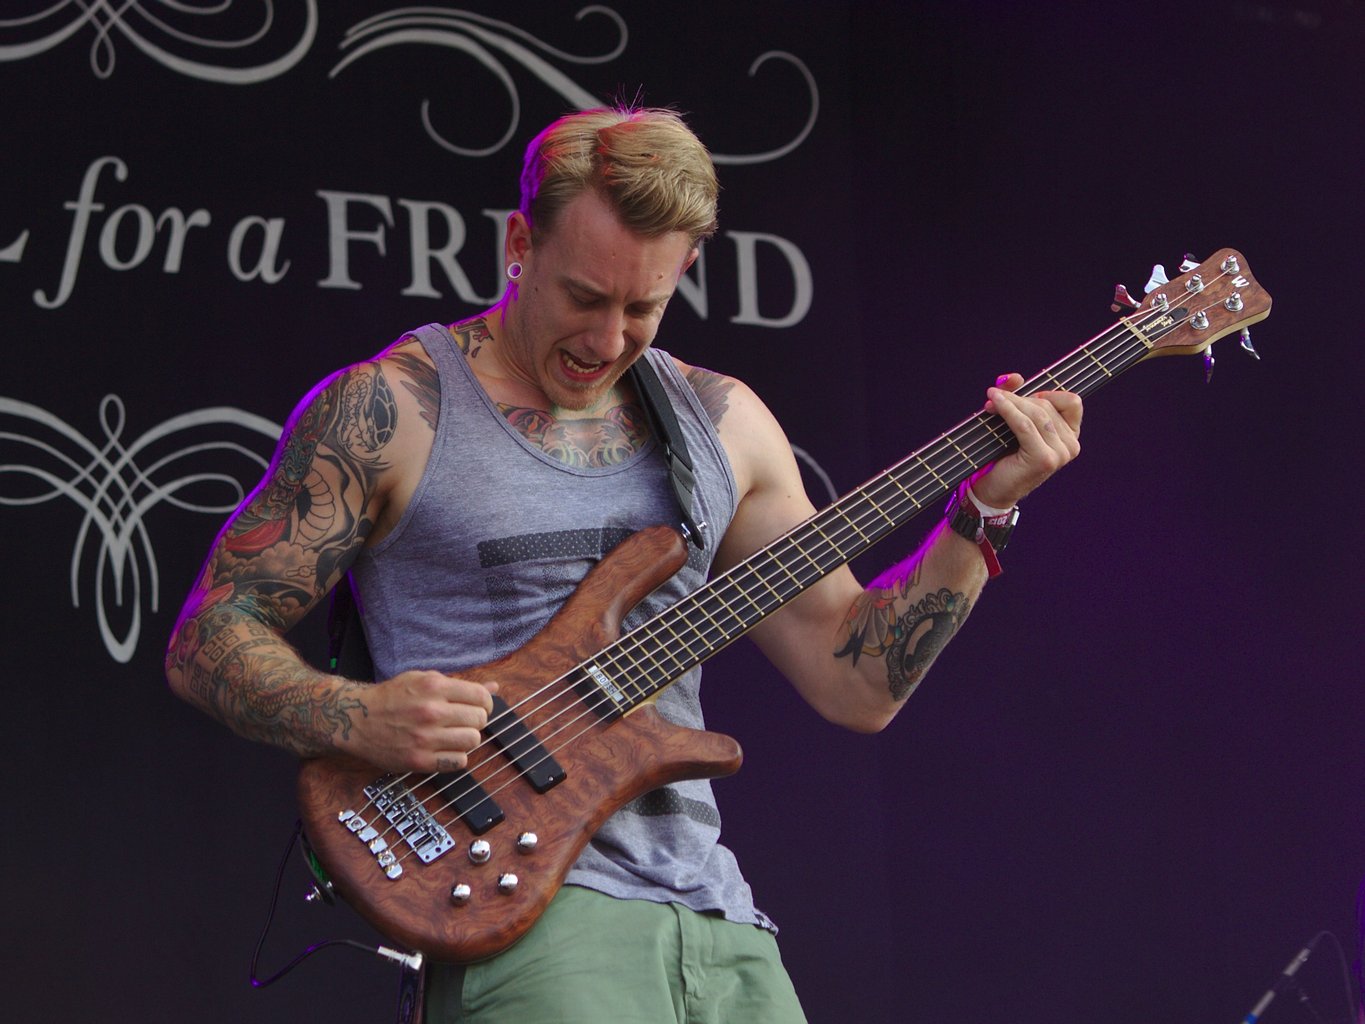 Tattoed bassist in sleeveless top looks at his bass